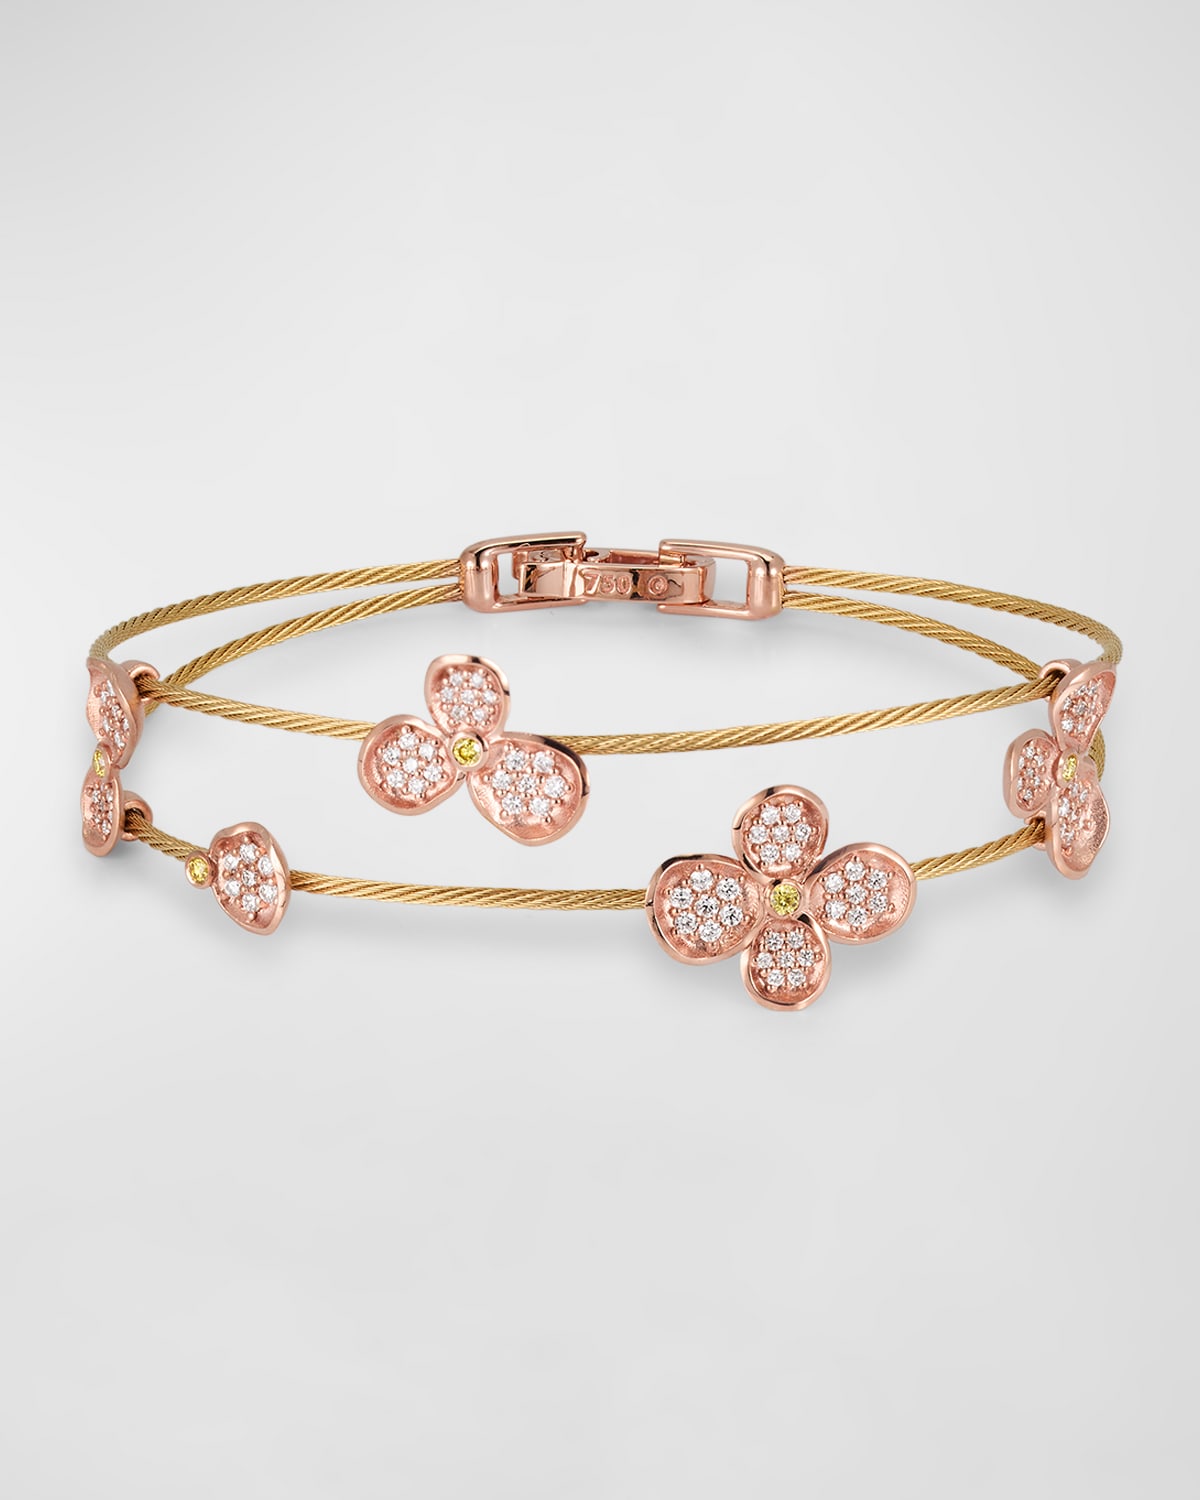 18K Yellow and Rose Gold Forget Me Not Double Unity Bracelet with Diamonds